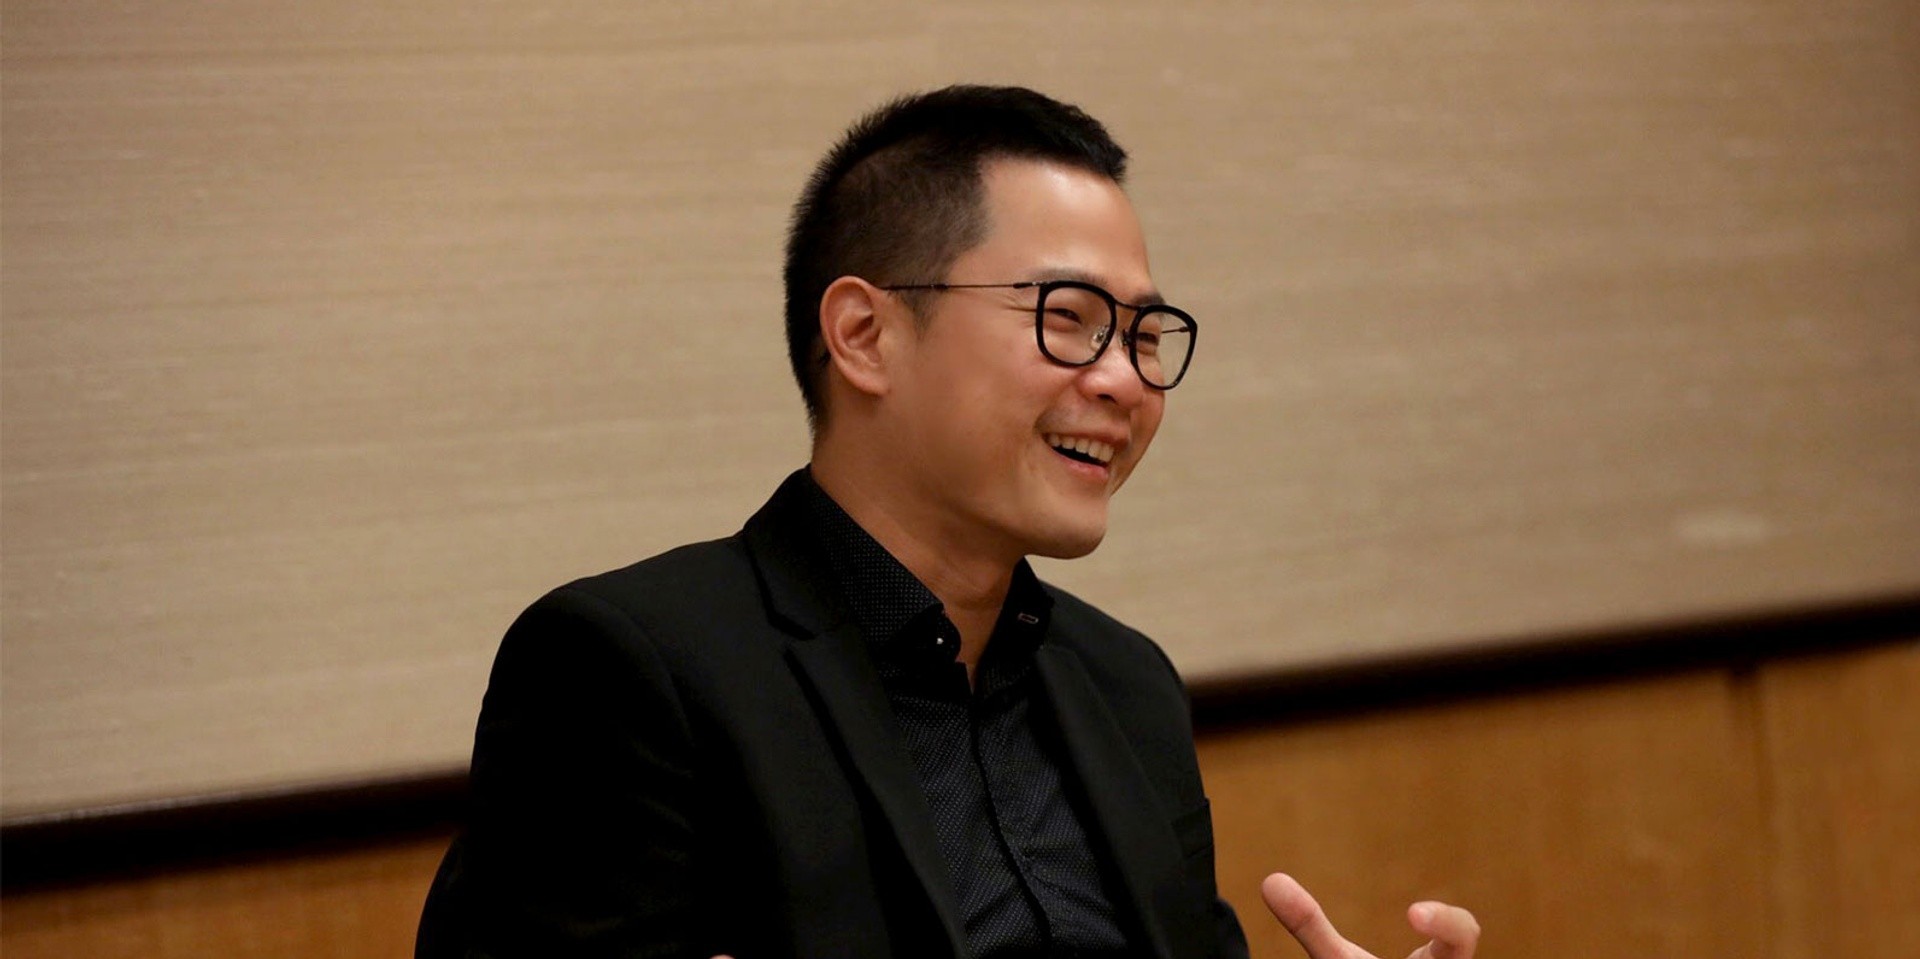 "We are trying to fulfil our vision of having music available anytime, anywhere": An interview with Dennis Hau, Group Vice President of Tencent Music Entertainment